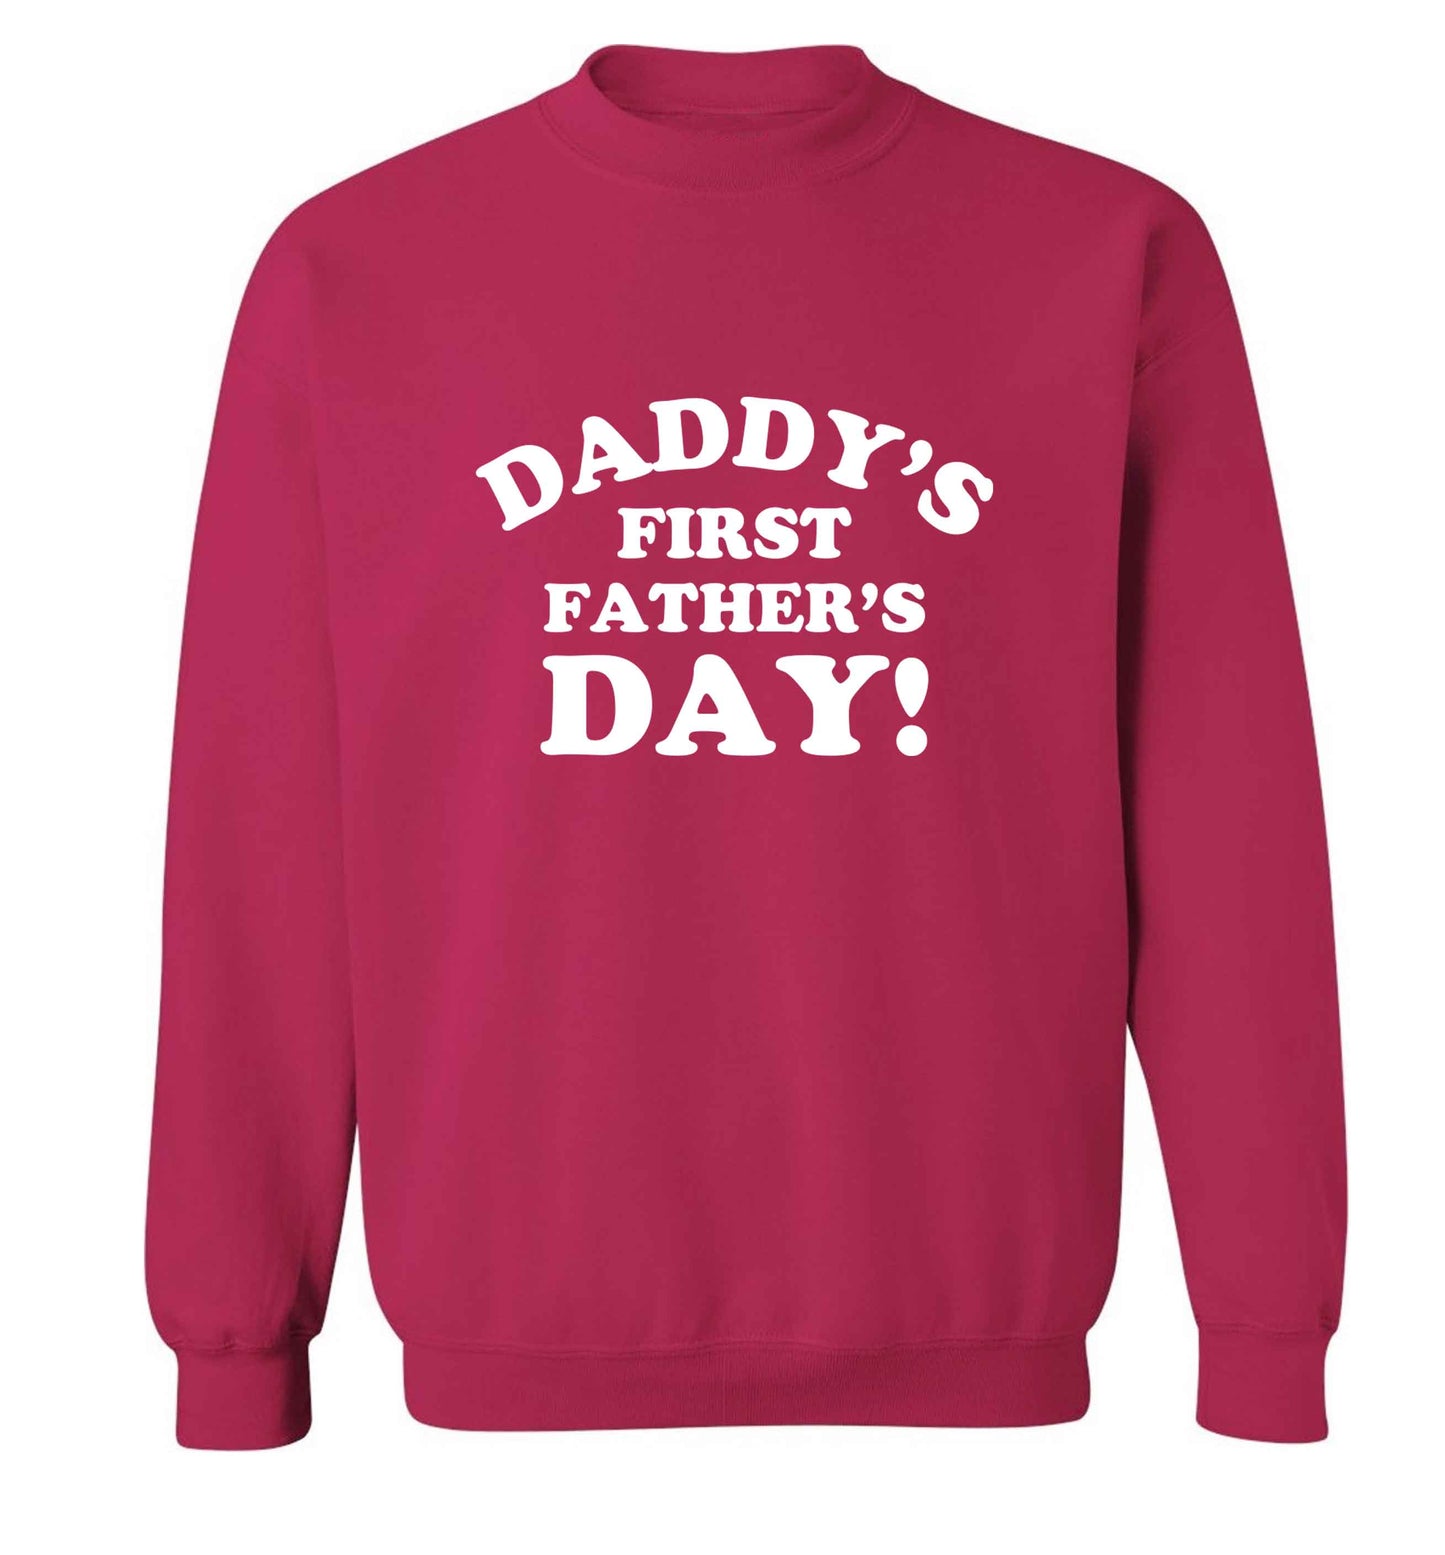 Daddy's first father's day adult's unisex pink sweater 2XL